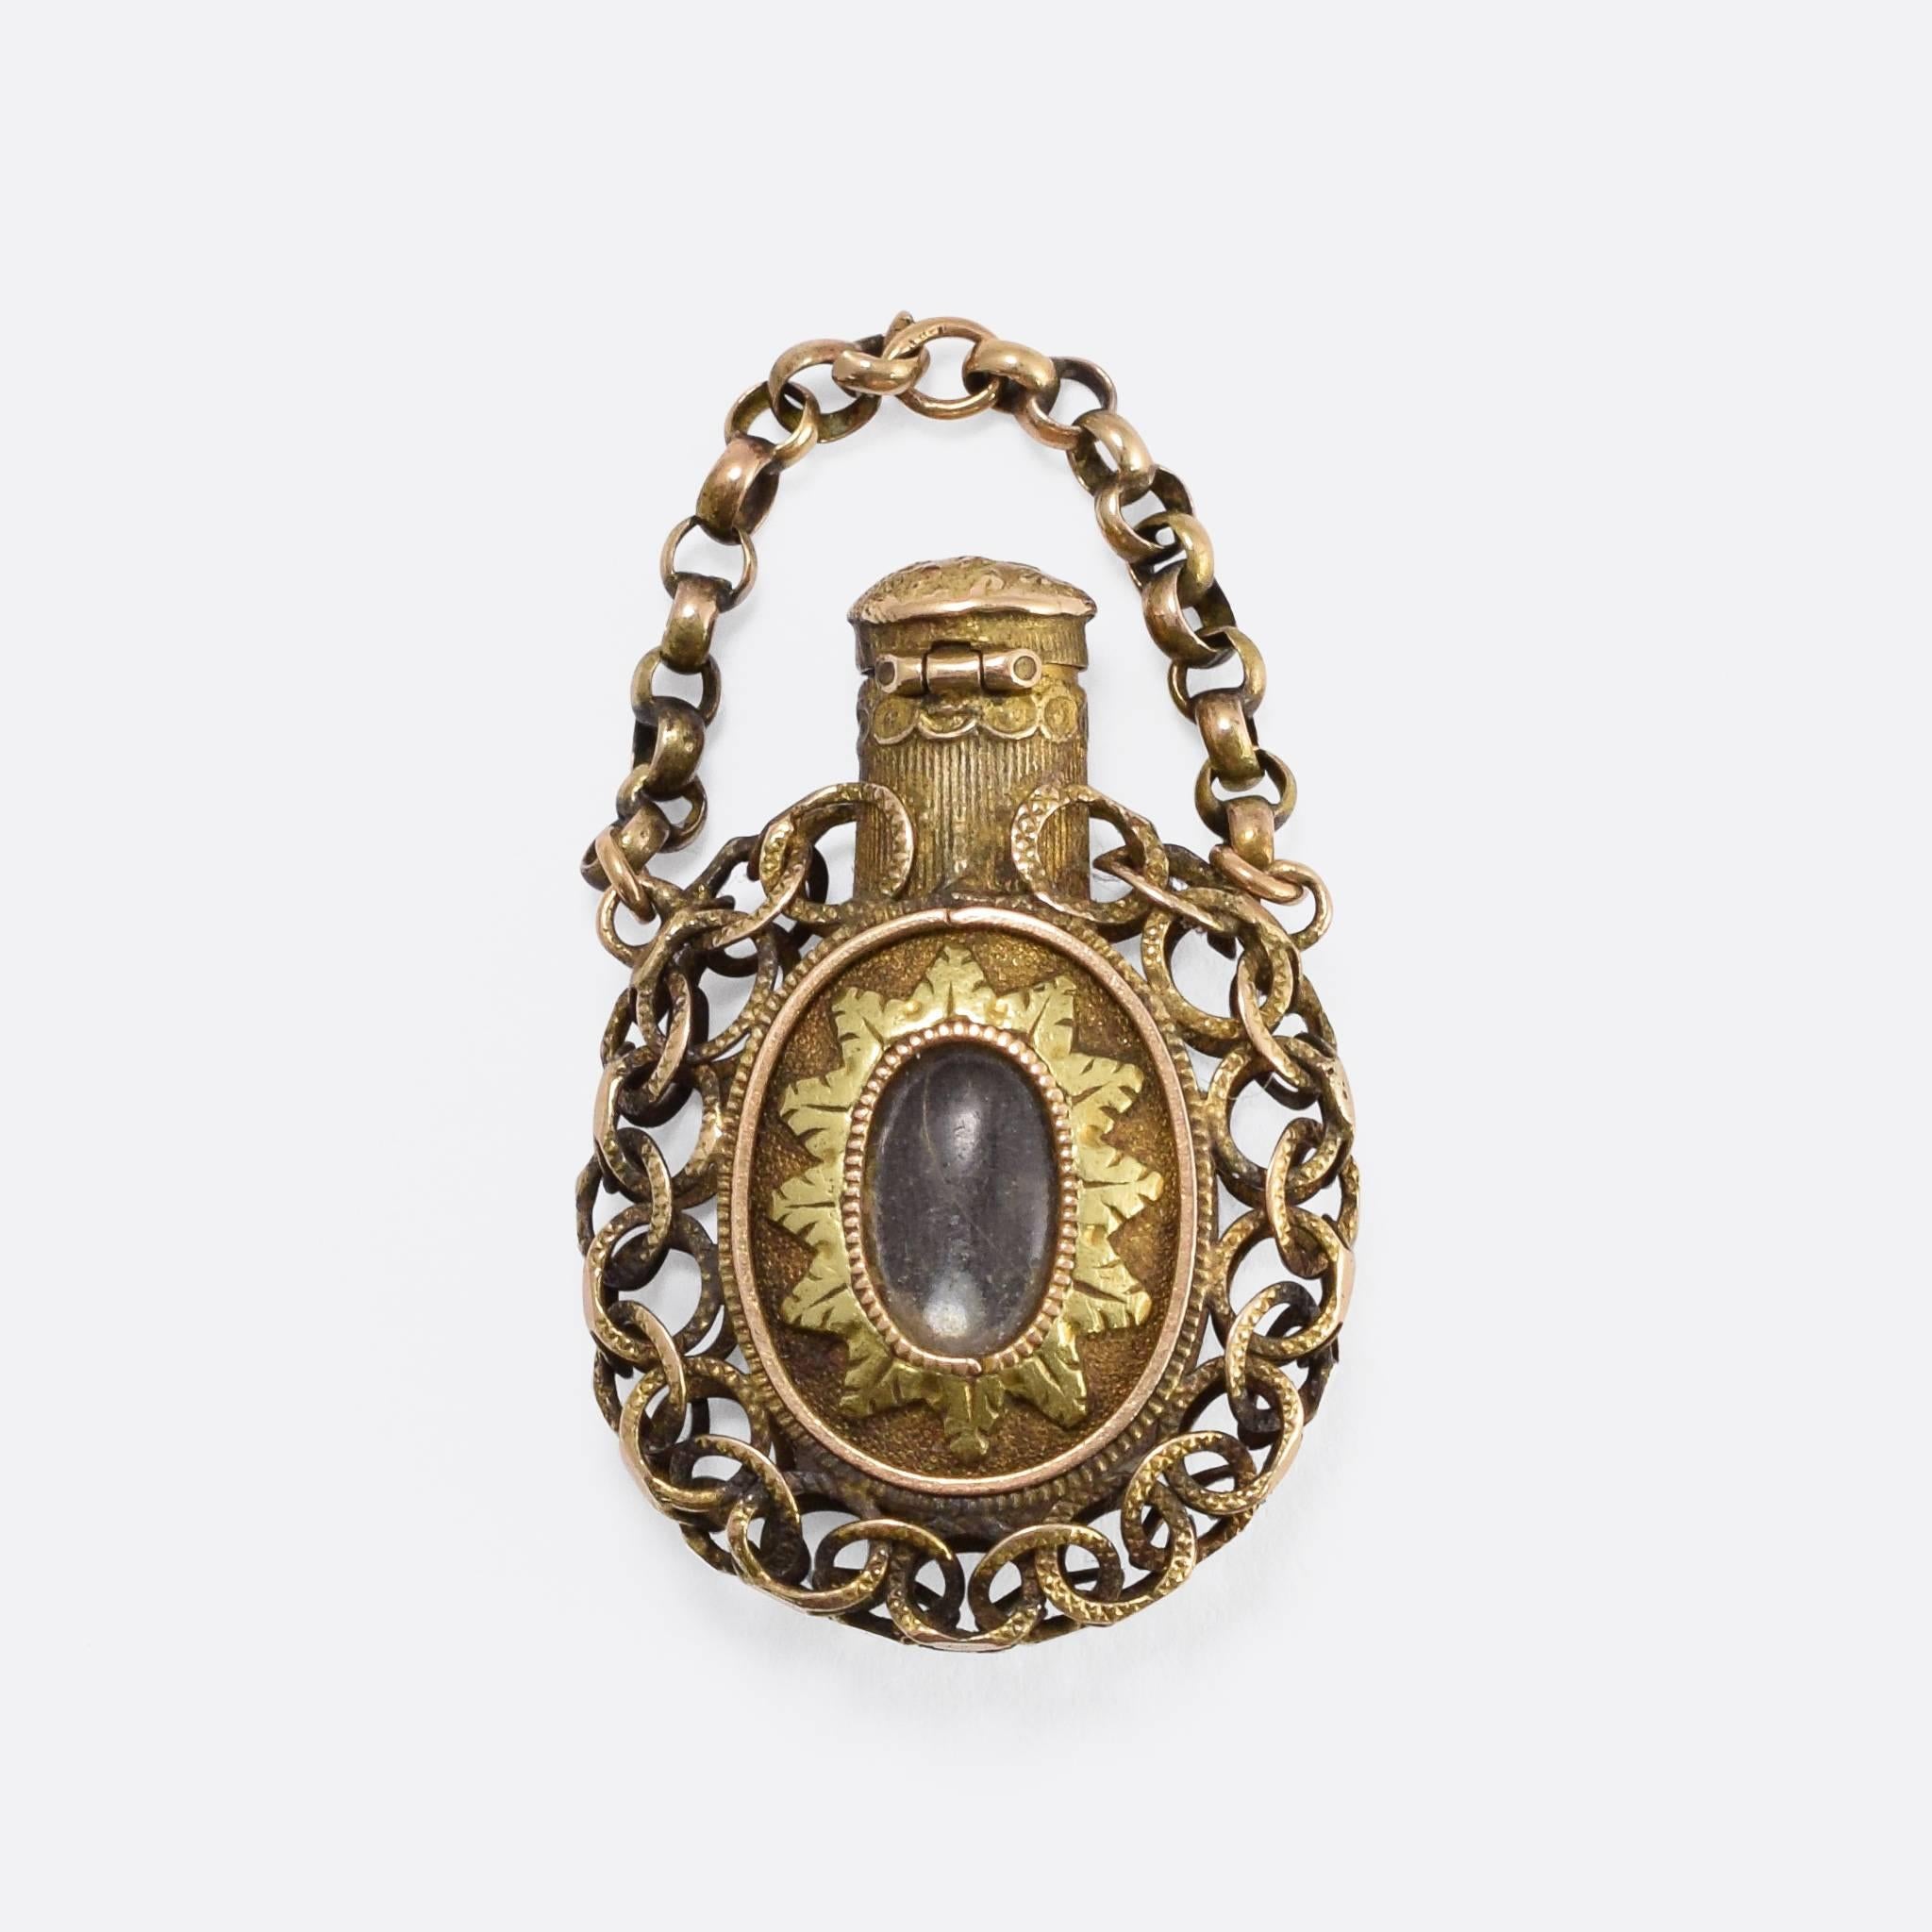 A wonderful Georgian period scent bottle, on one side is set a shell cameo of a cherub with flute, and on the other a locket compartment with an applied two-tone gold foliate surround. With a hinged top and superb chain-link goldwork around the